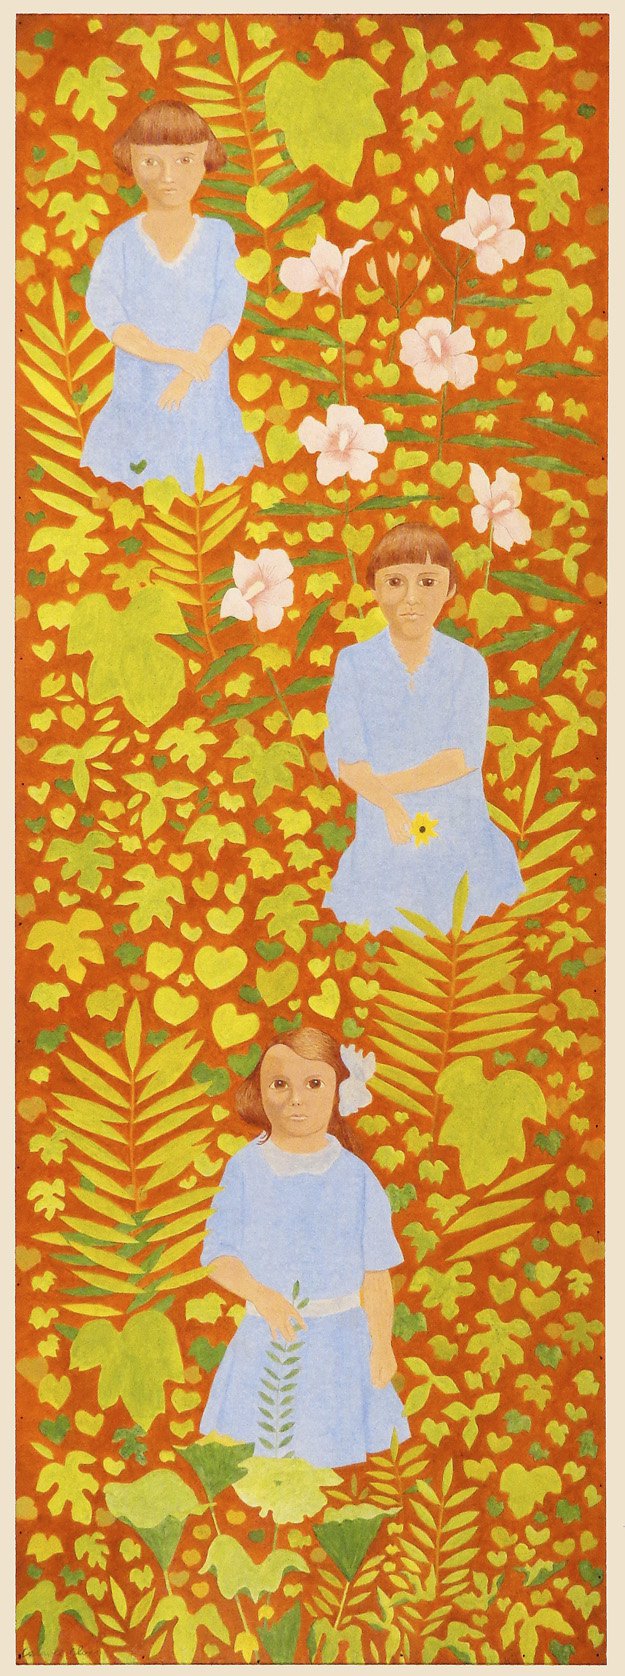 Carroll Cloar, American, 1913-1993The Garden of Love, ca. 1960Acrylic on plywoodCollection of Barbie and Ray Dan©Estate of Carroll Cloar